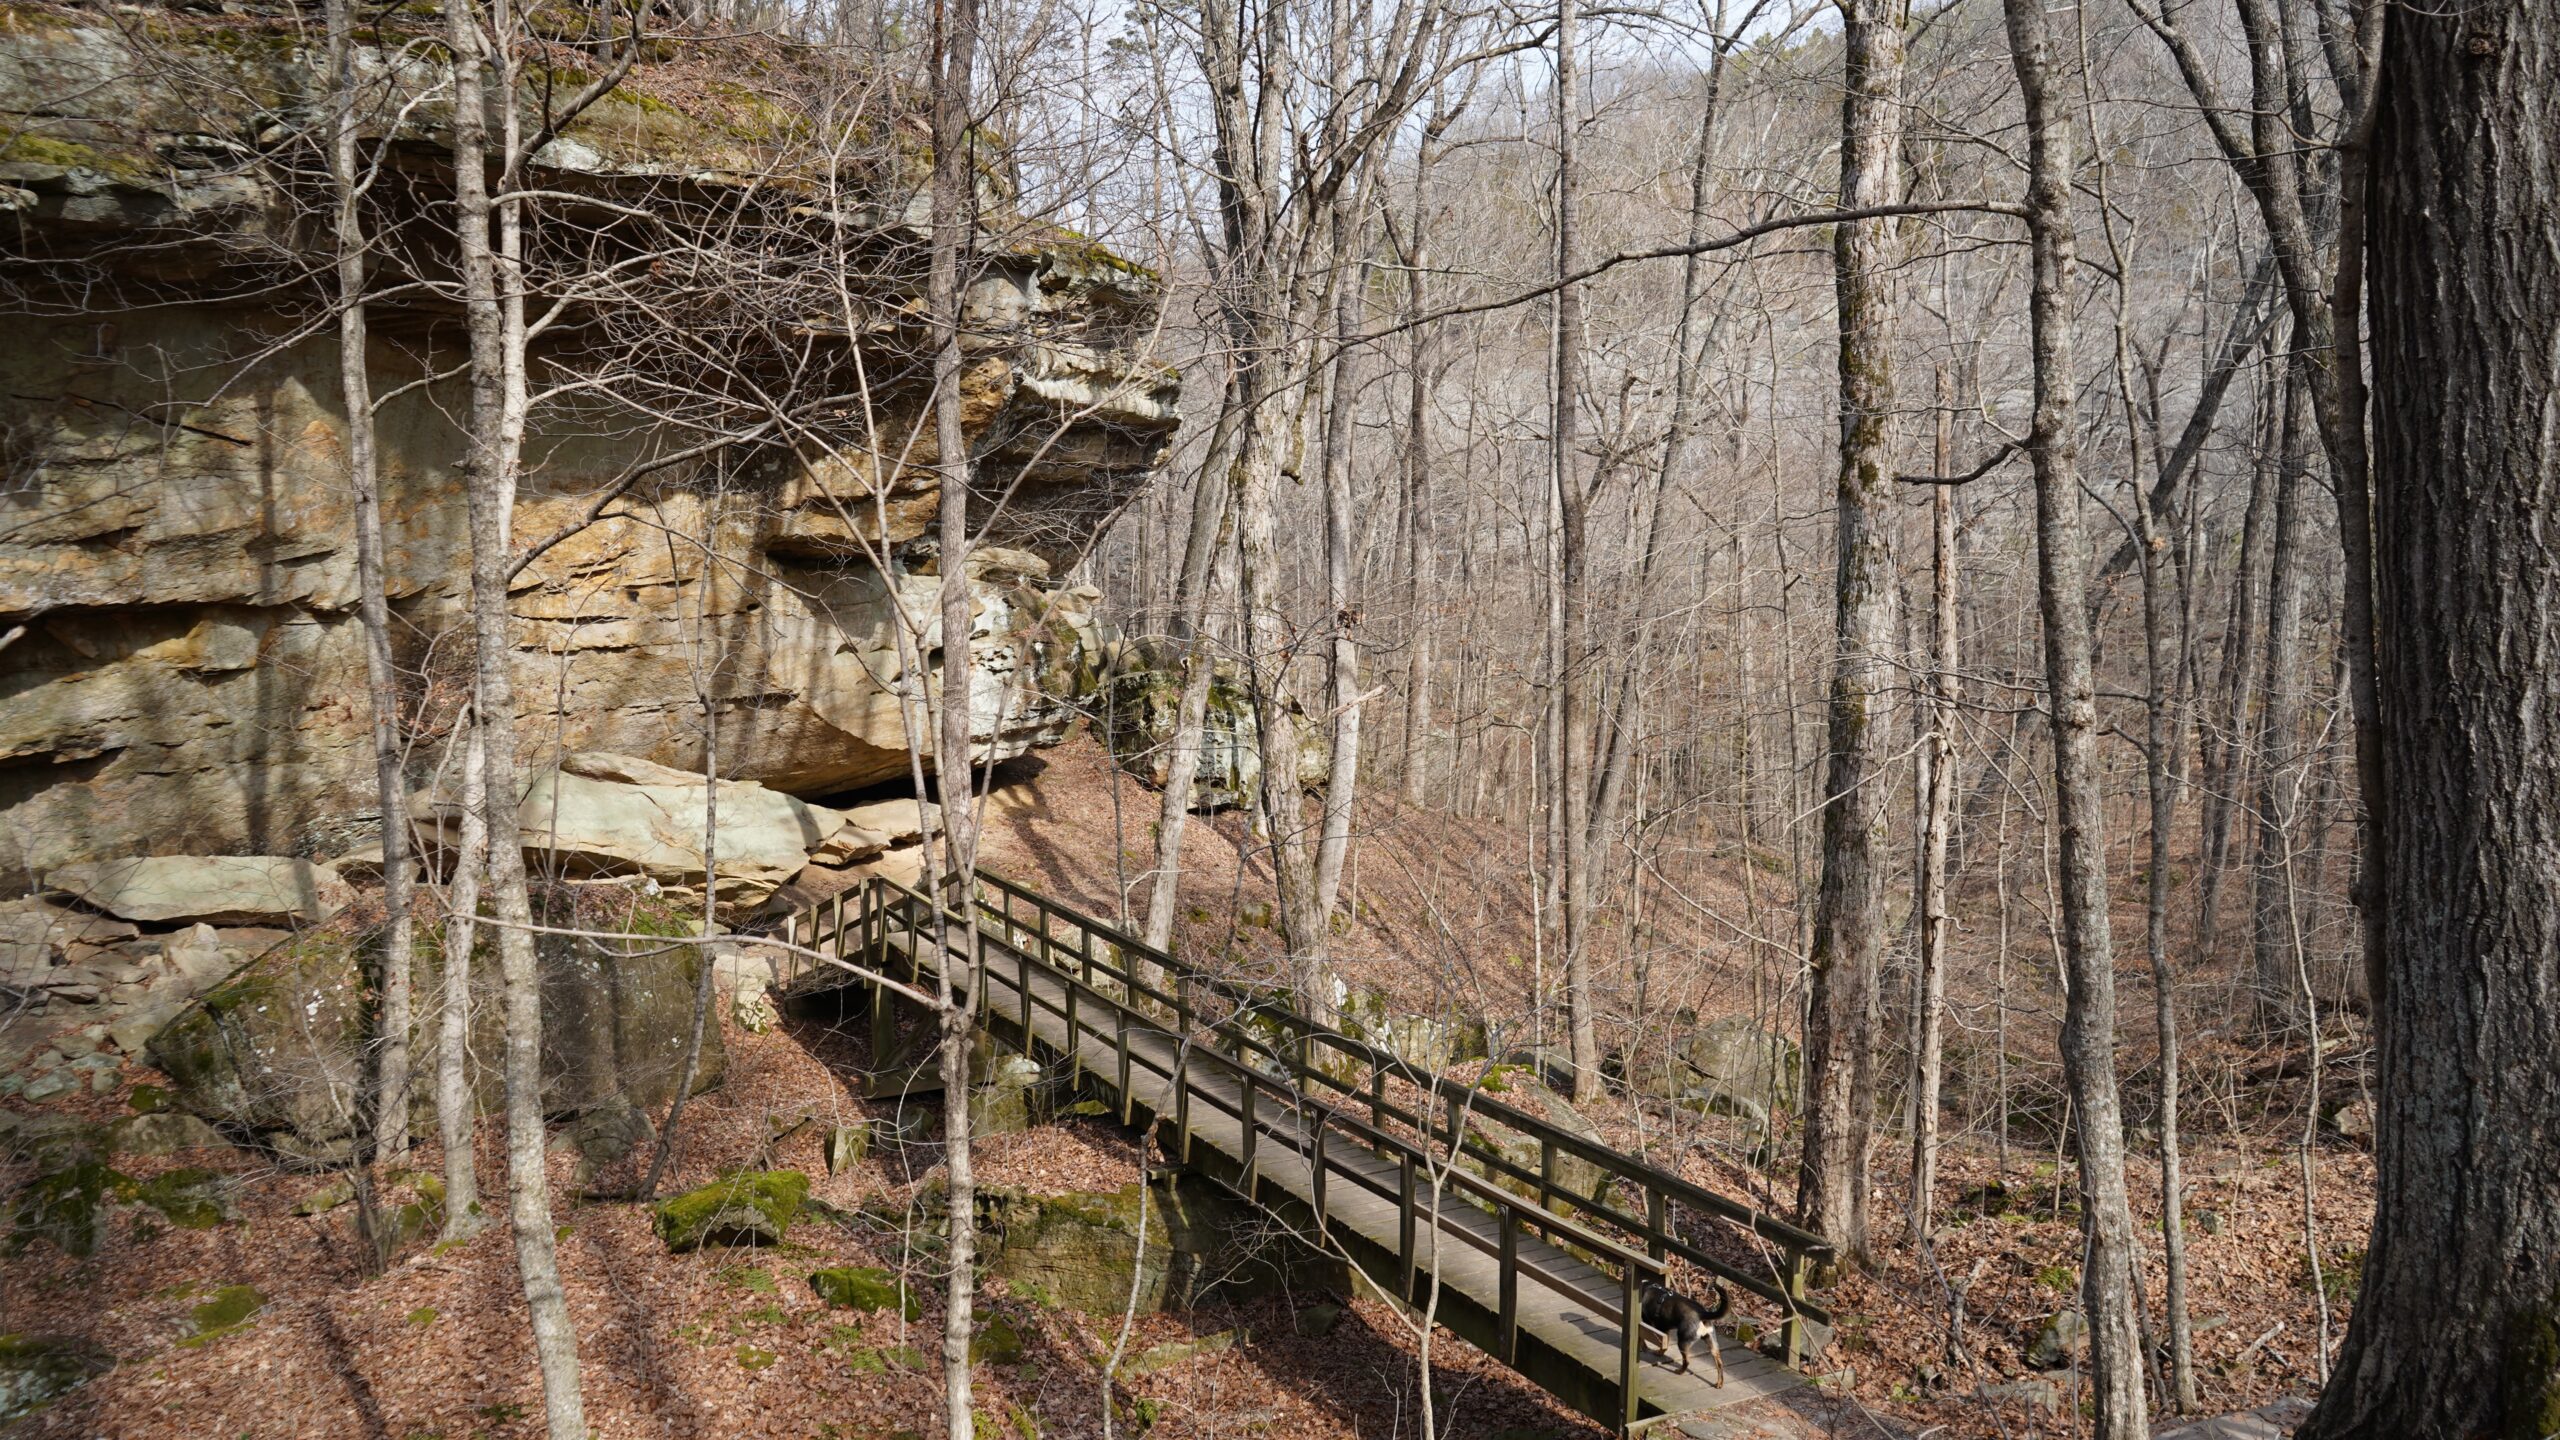 cliffs and a wooden foot bridge in shawnee national forest Illinois